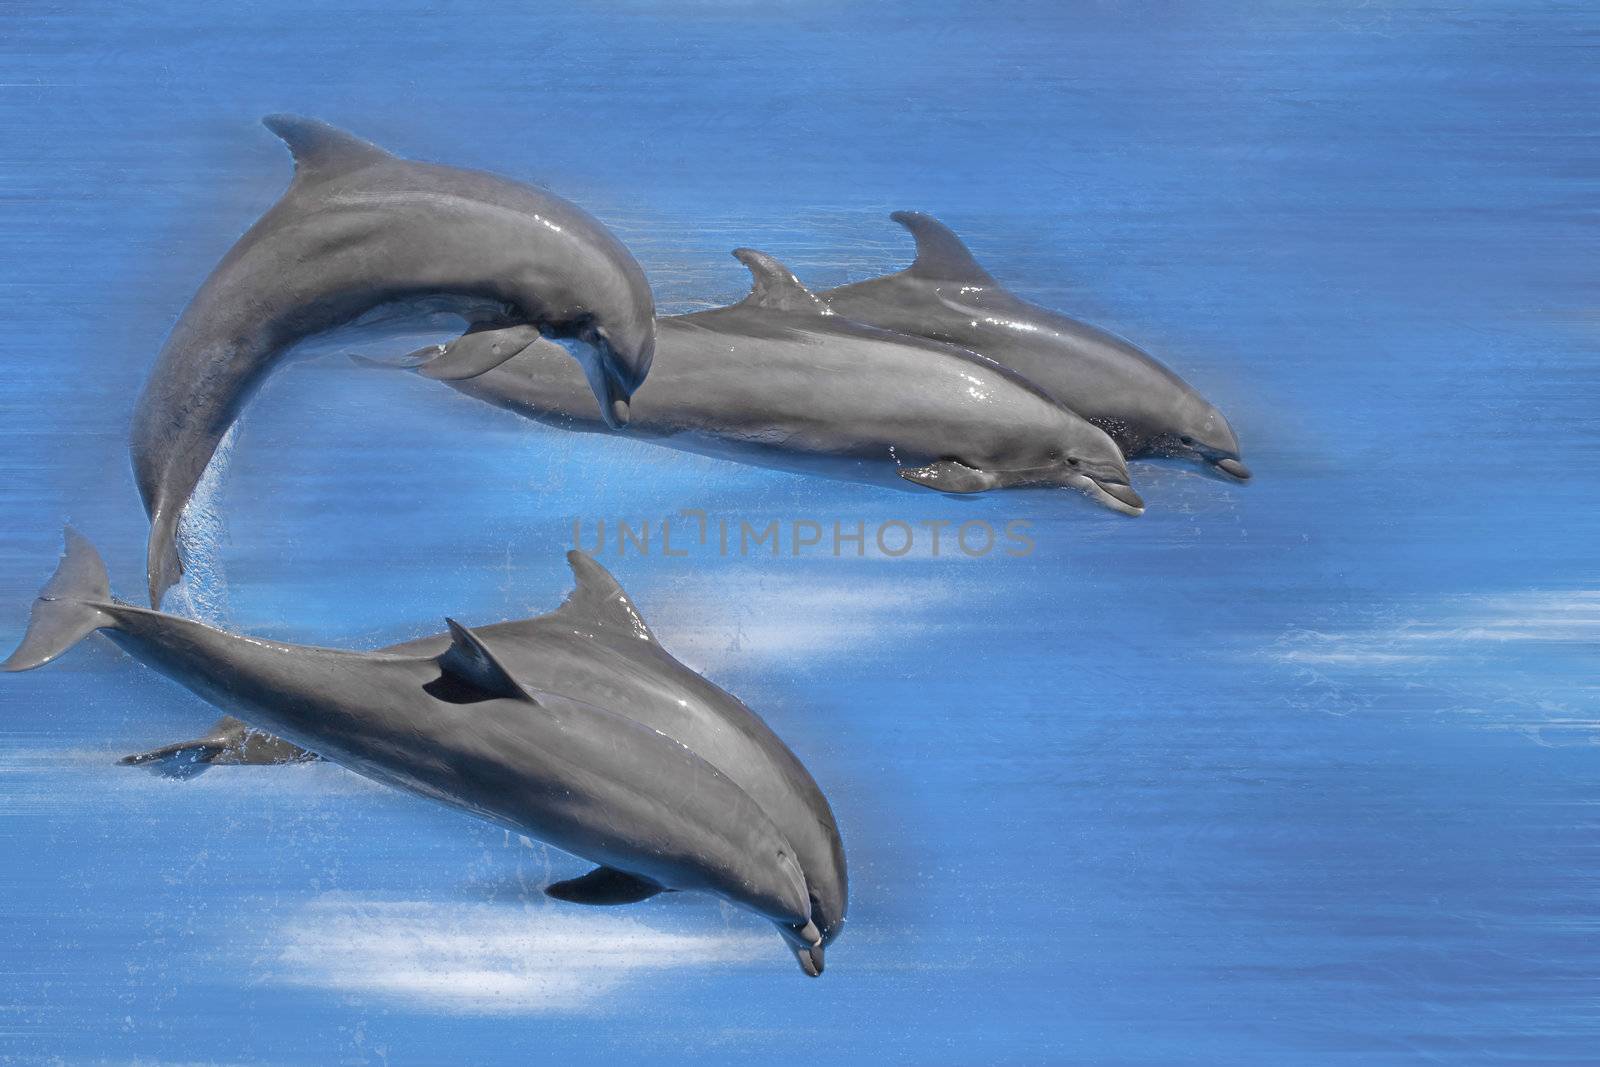 Five dolphins soaring across the water